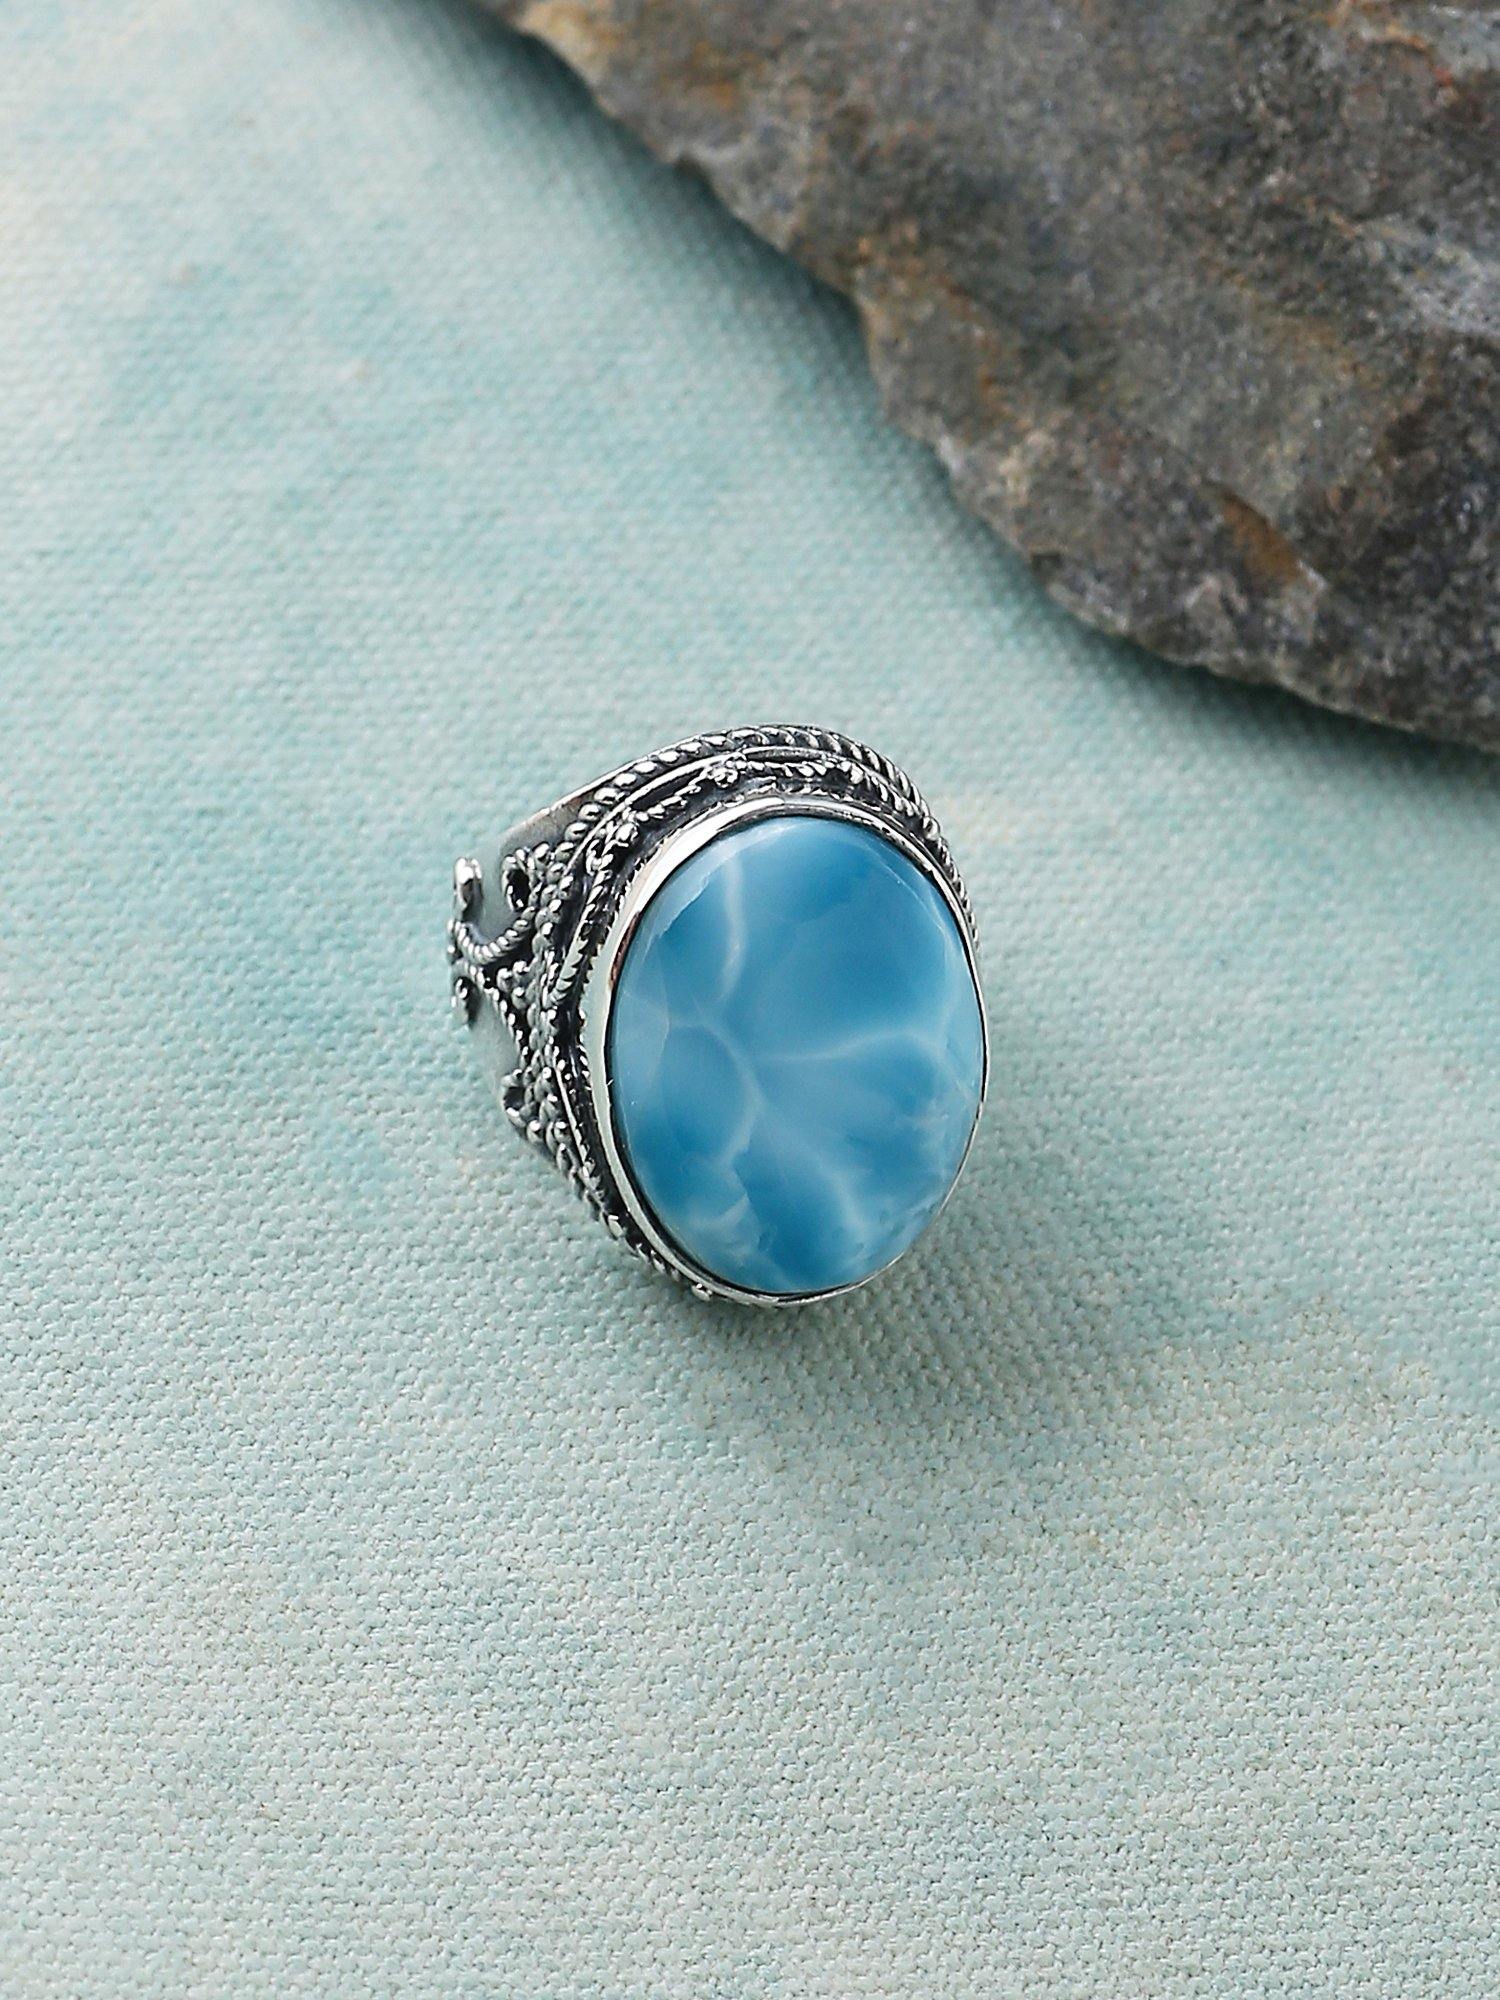 Natural Larimar Solid 925 Sterling Silver Cocktail Ring Jewelry - YoTreasure